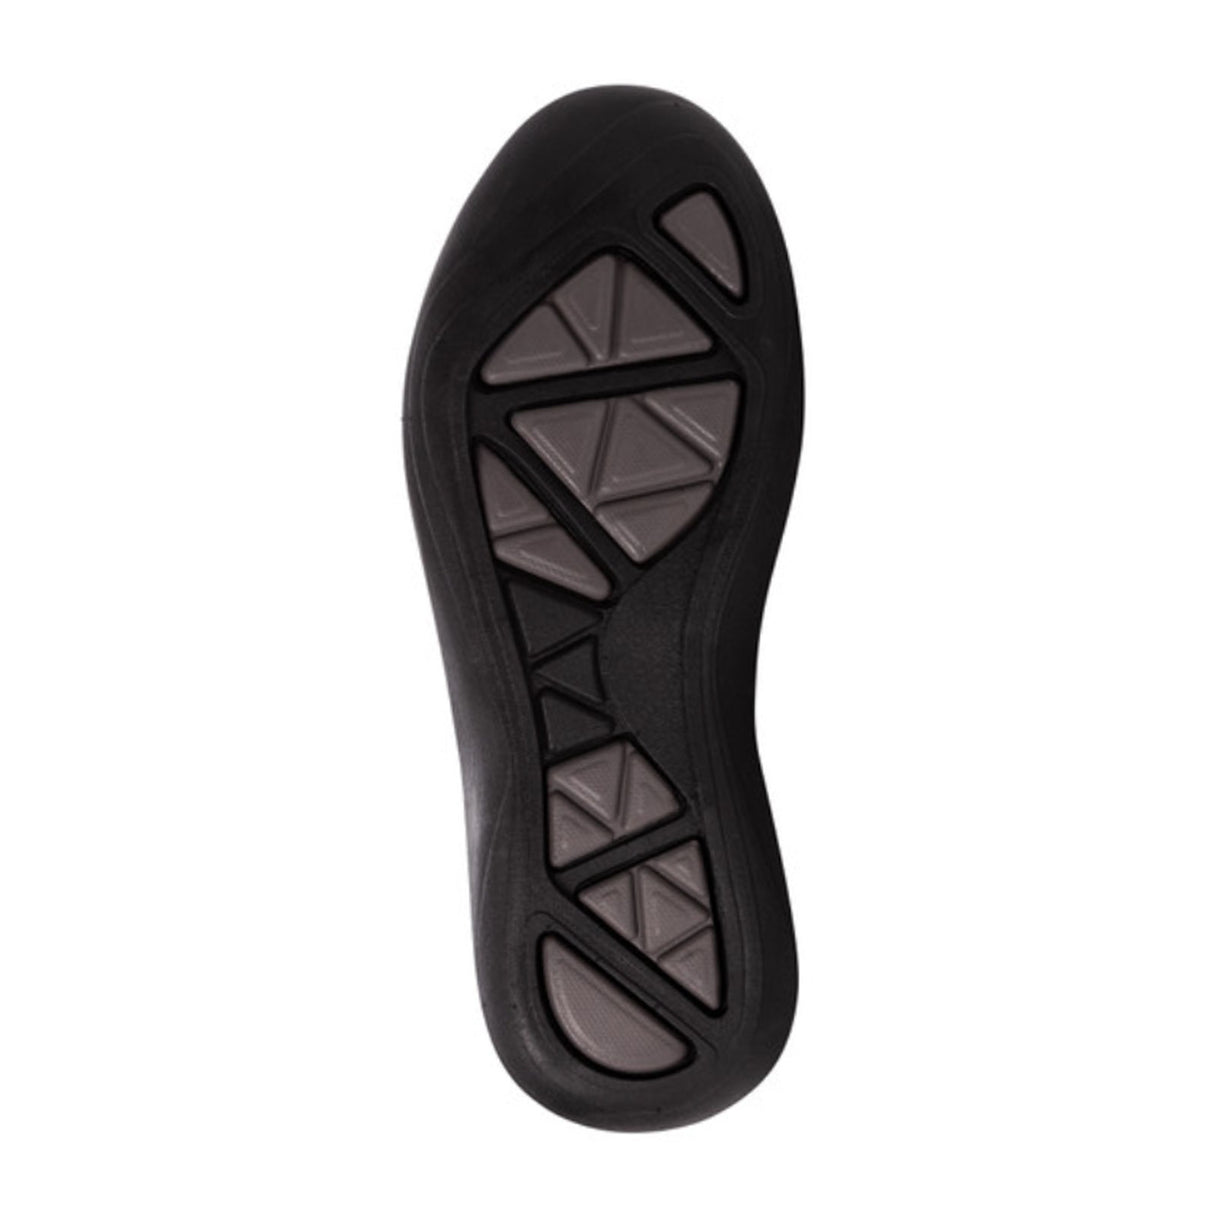 Propet Stability X Strap Sneaker (Women) - Black Athletic - Athleisure - The Heel Shoe Fitters